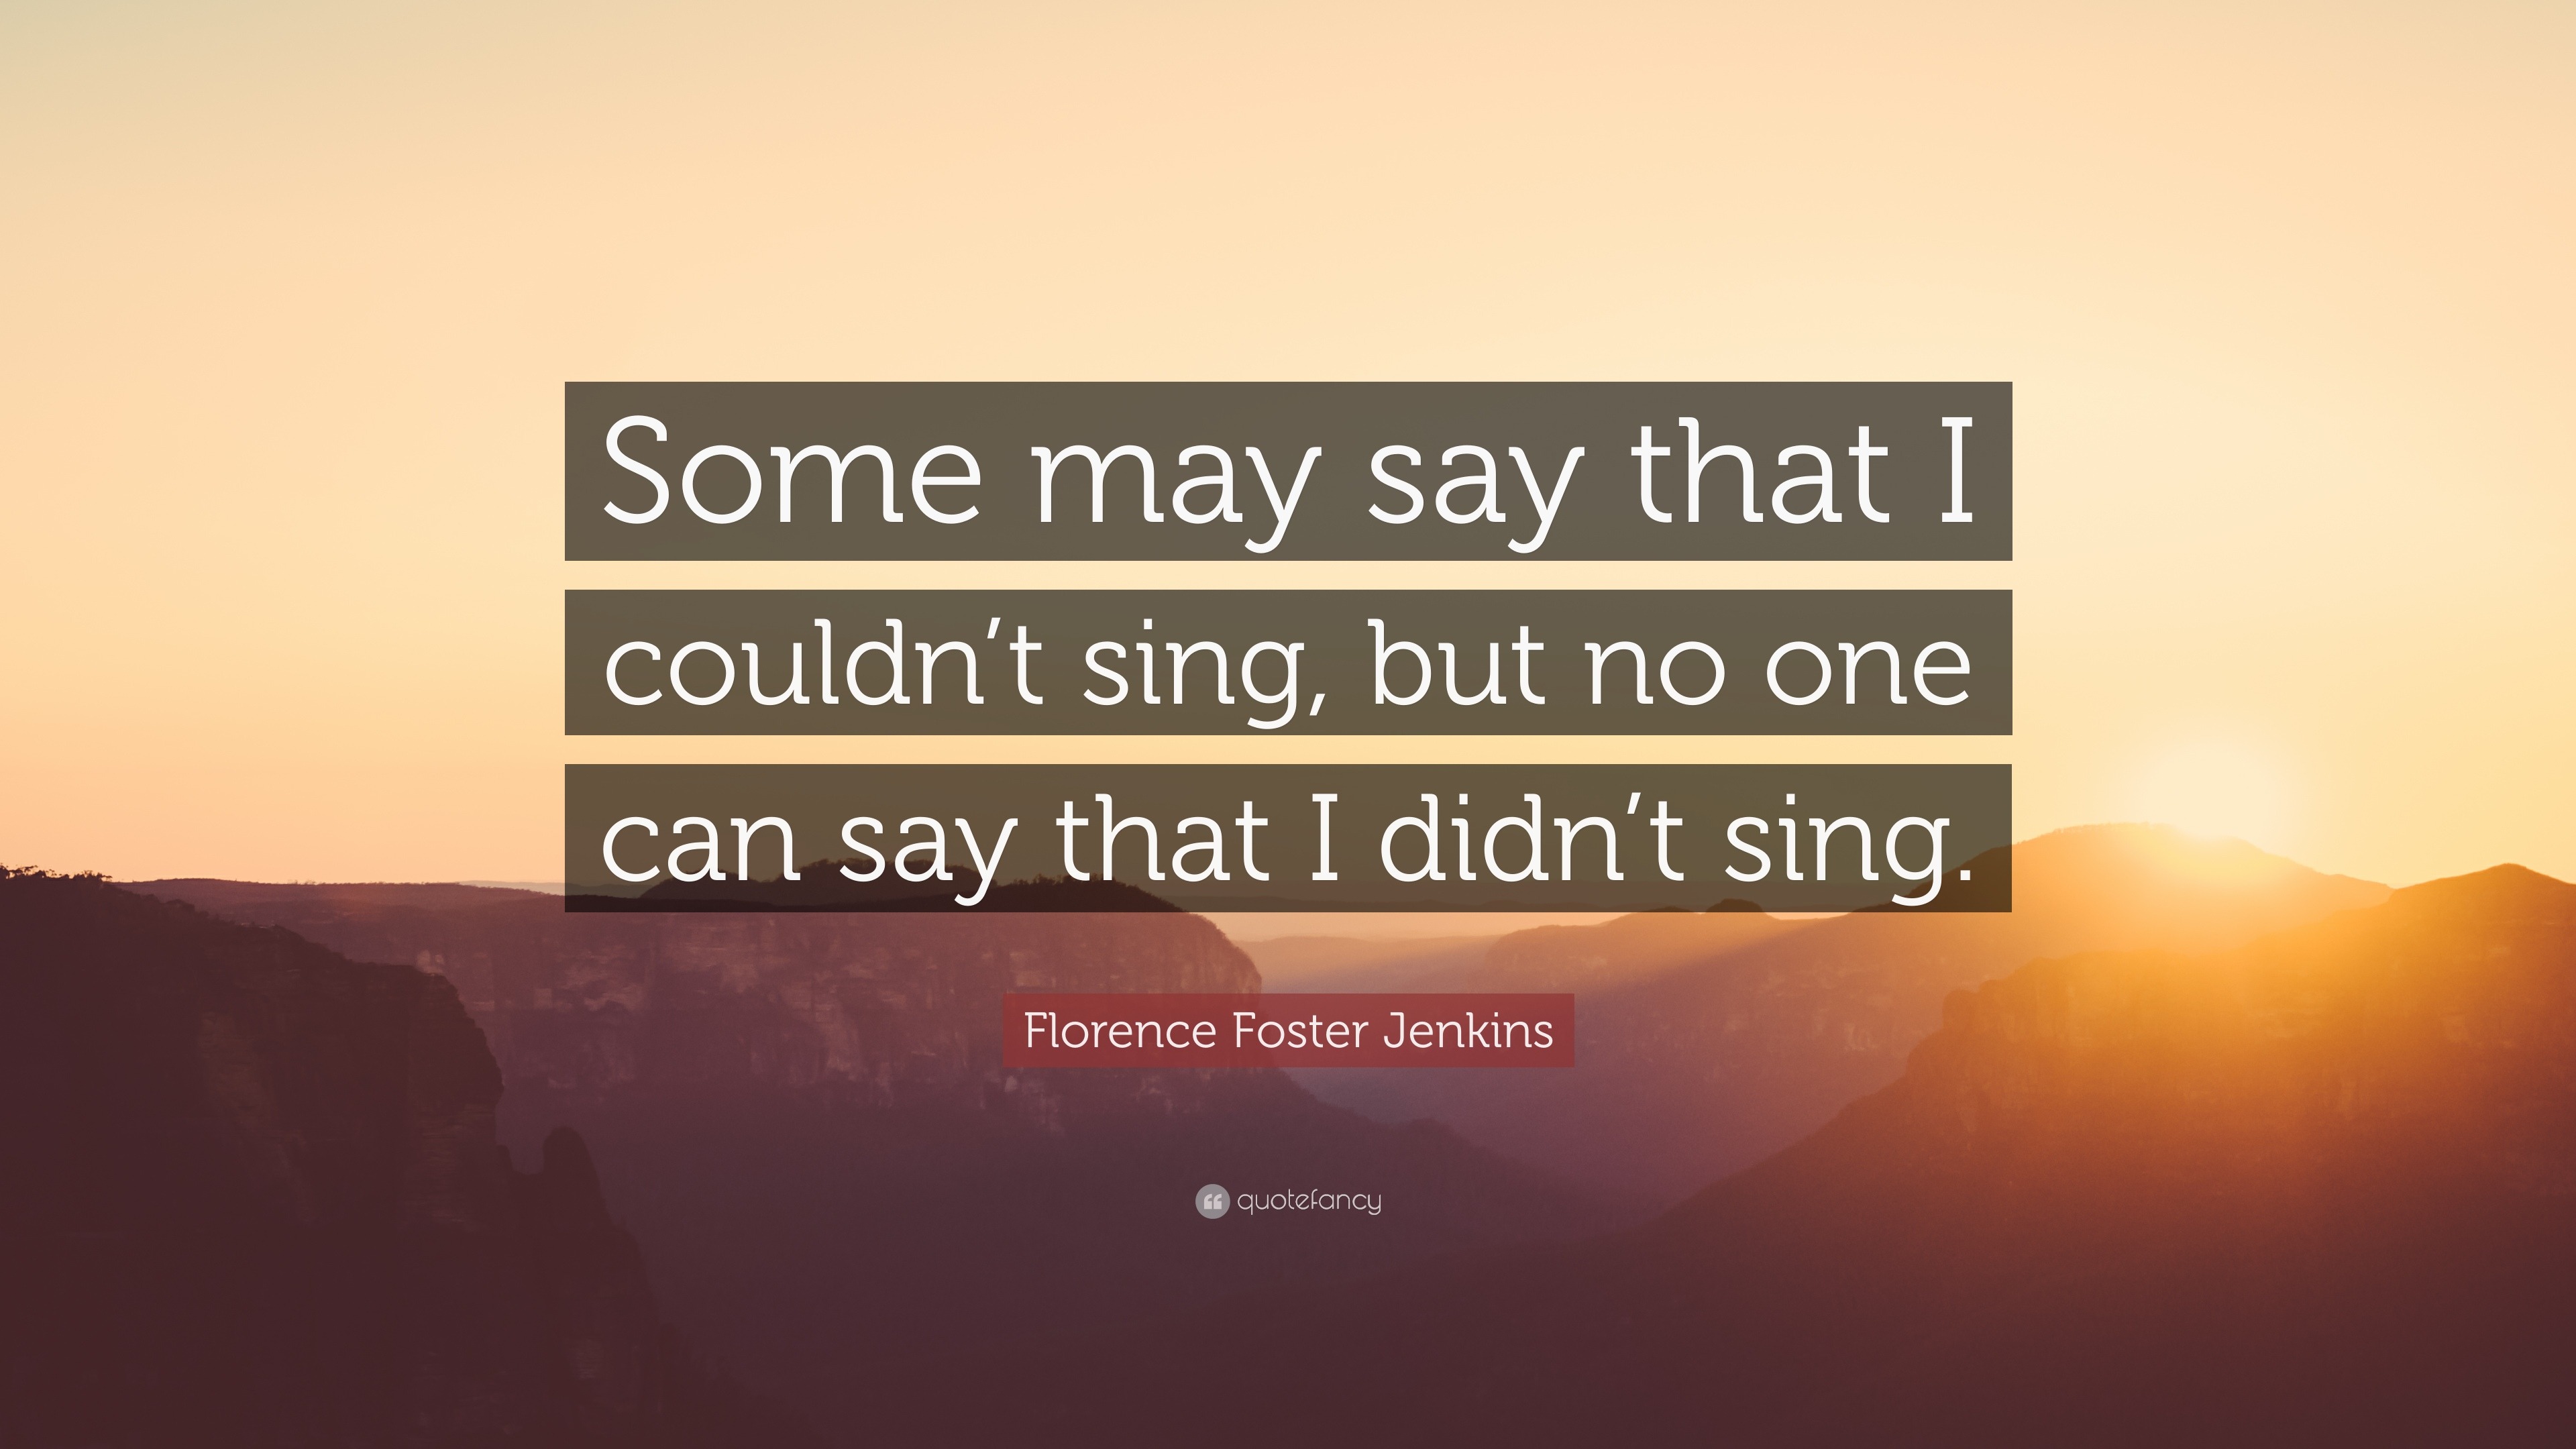 Florence Foster Jenkins Quote: “Some may say that I couldn’t sing, but